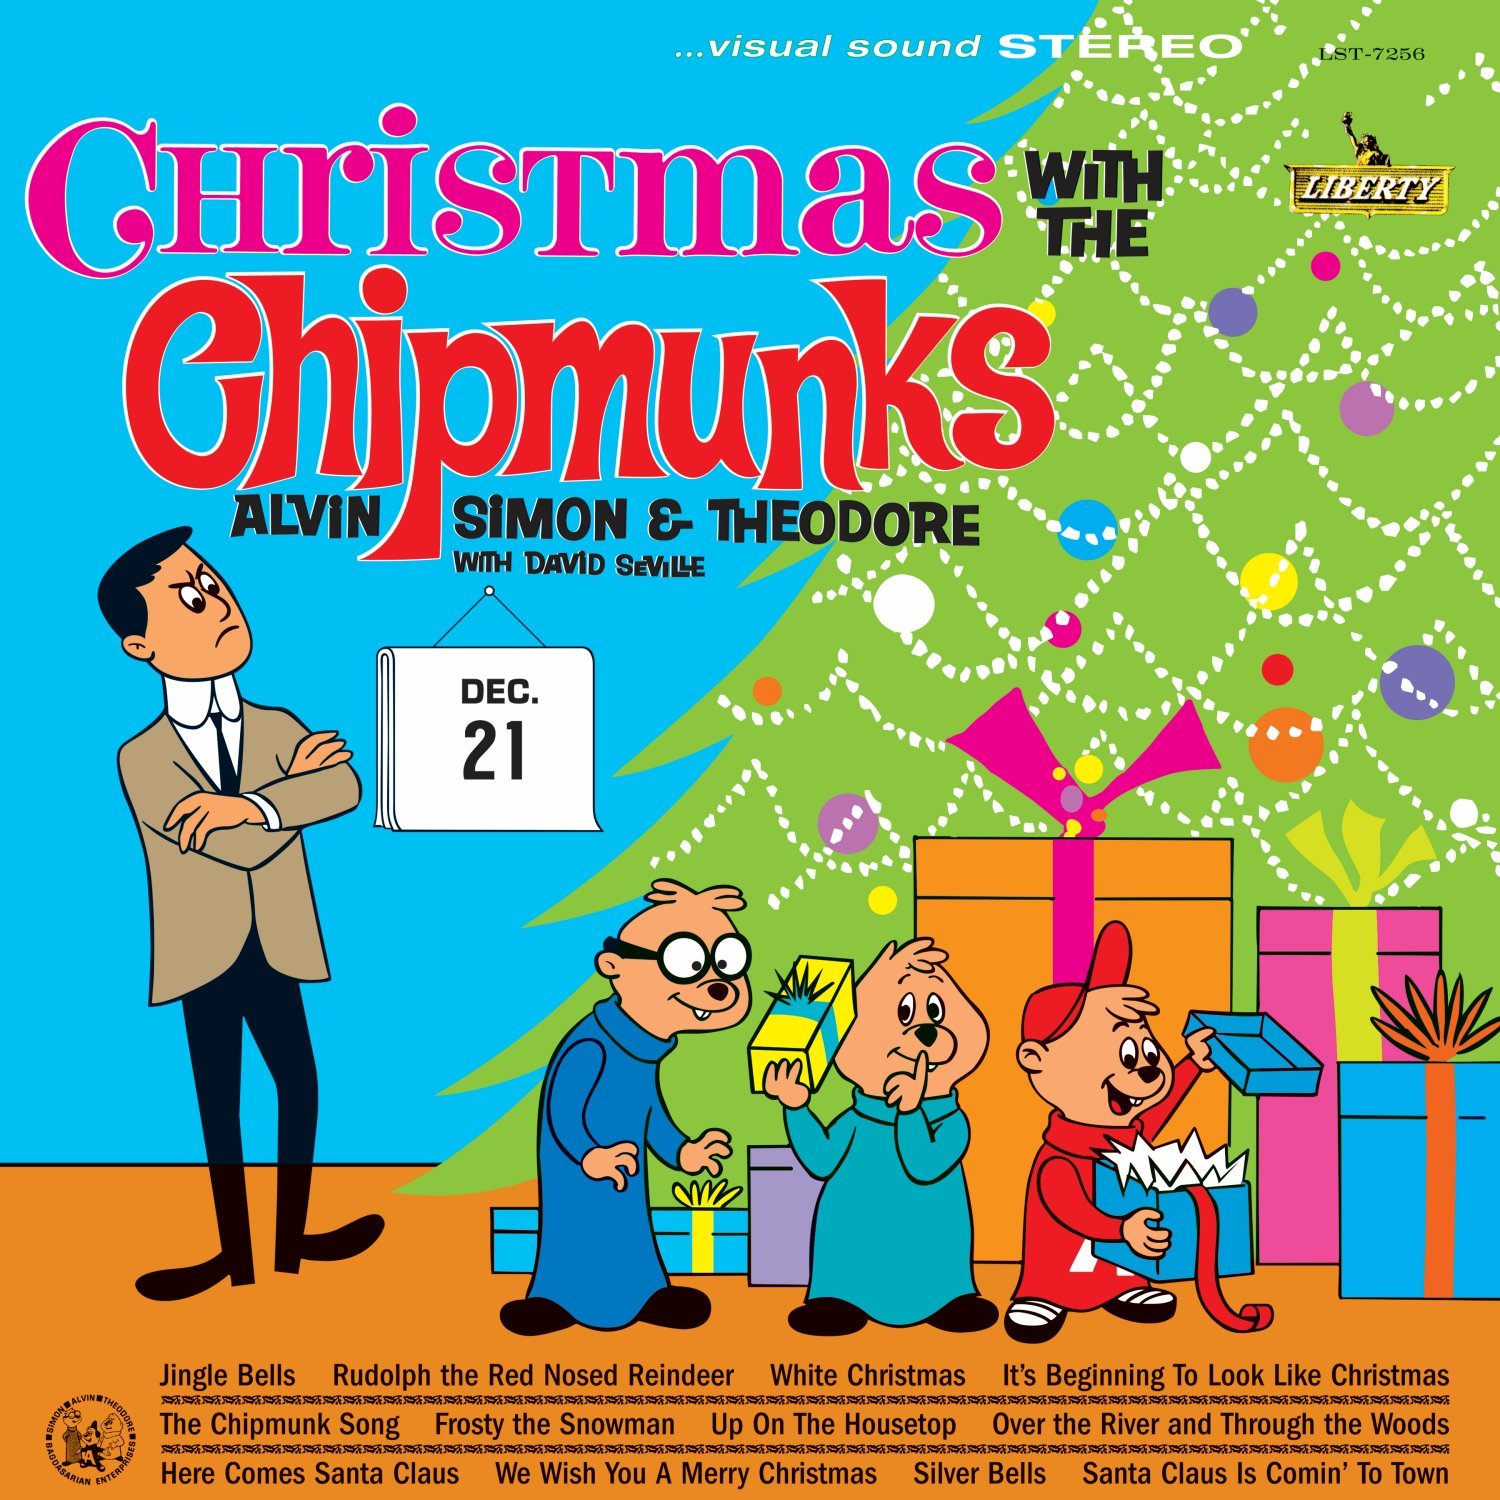 Christmas With The Chipmunks [LP] on MovieShack